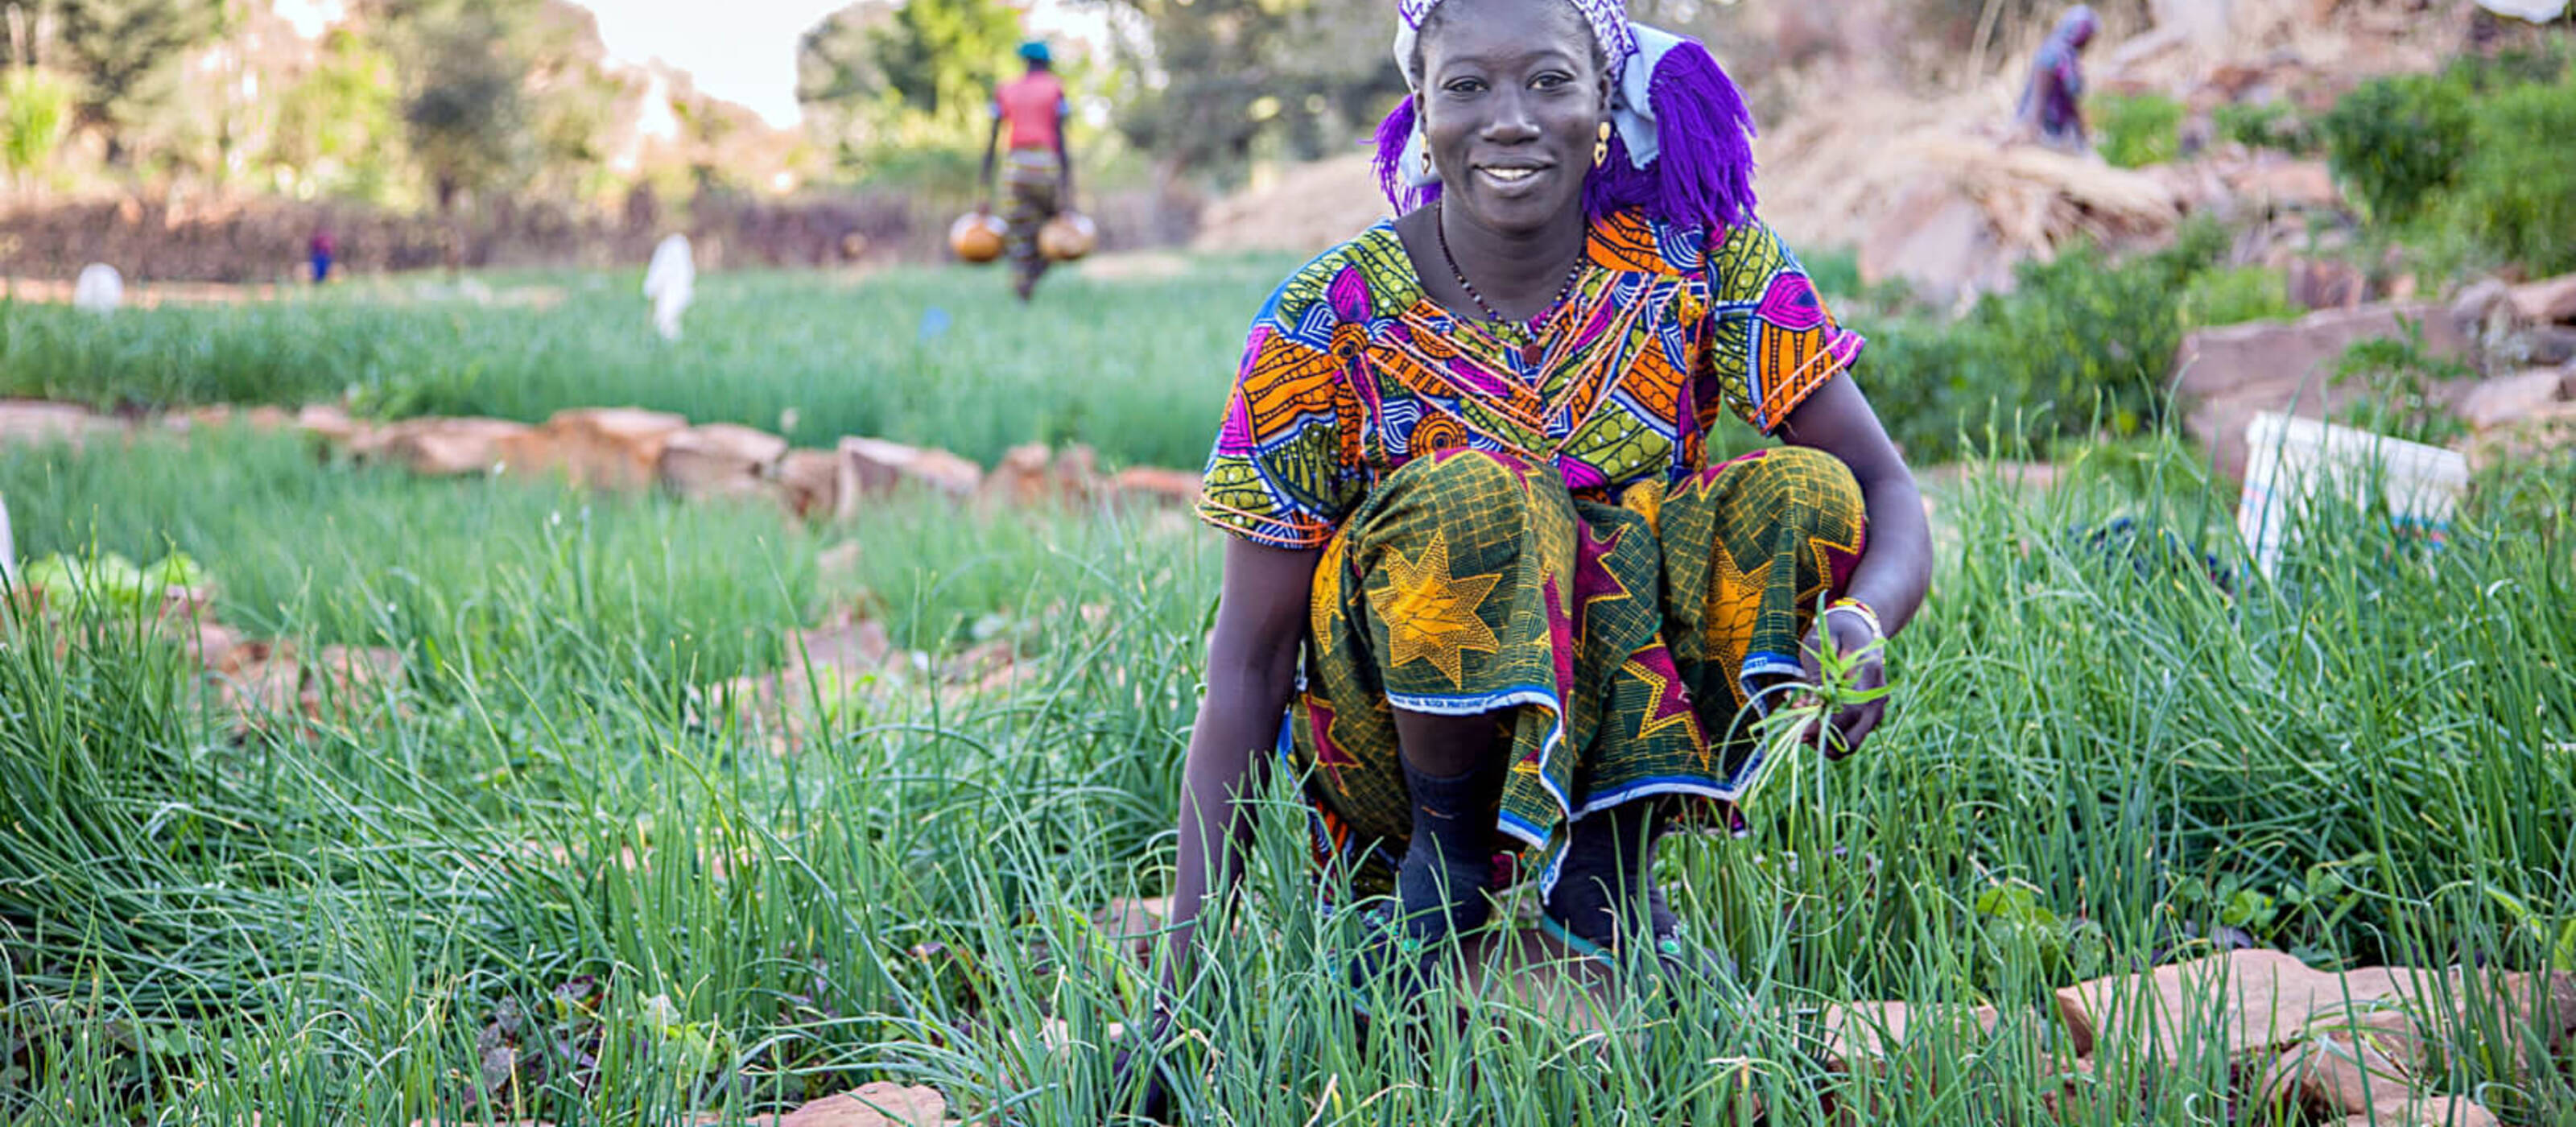 Namata Natoune, farmer and producer, works on her field